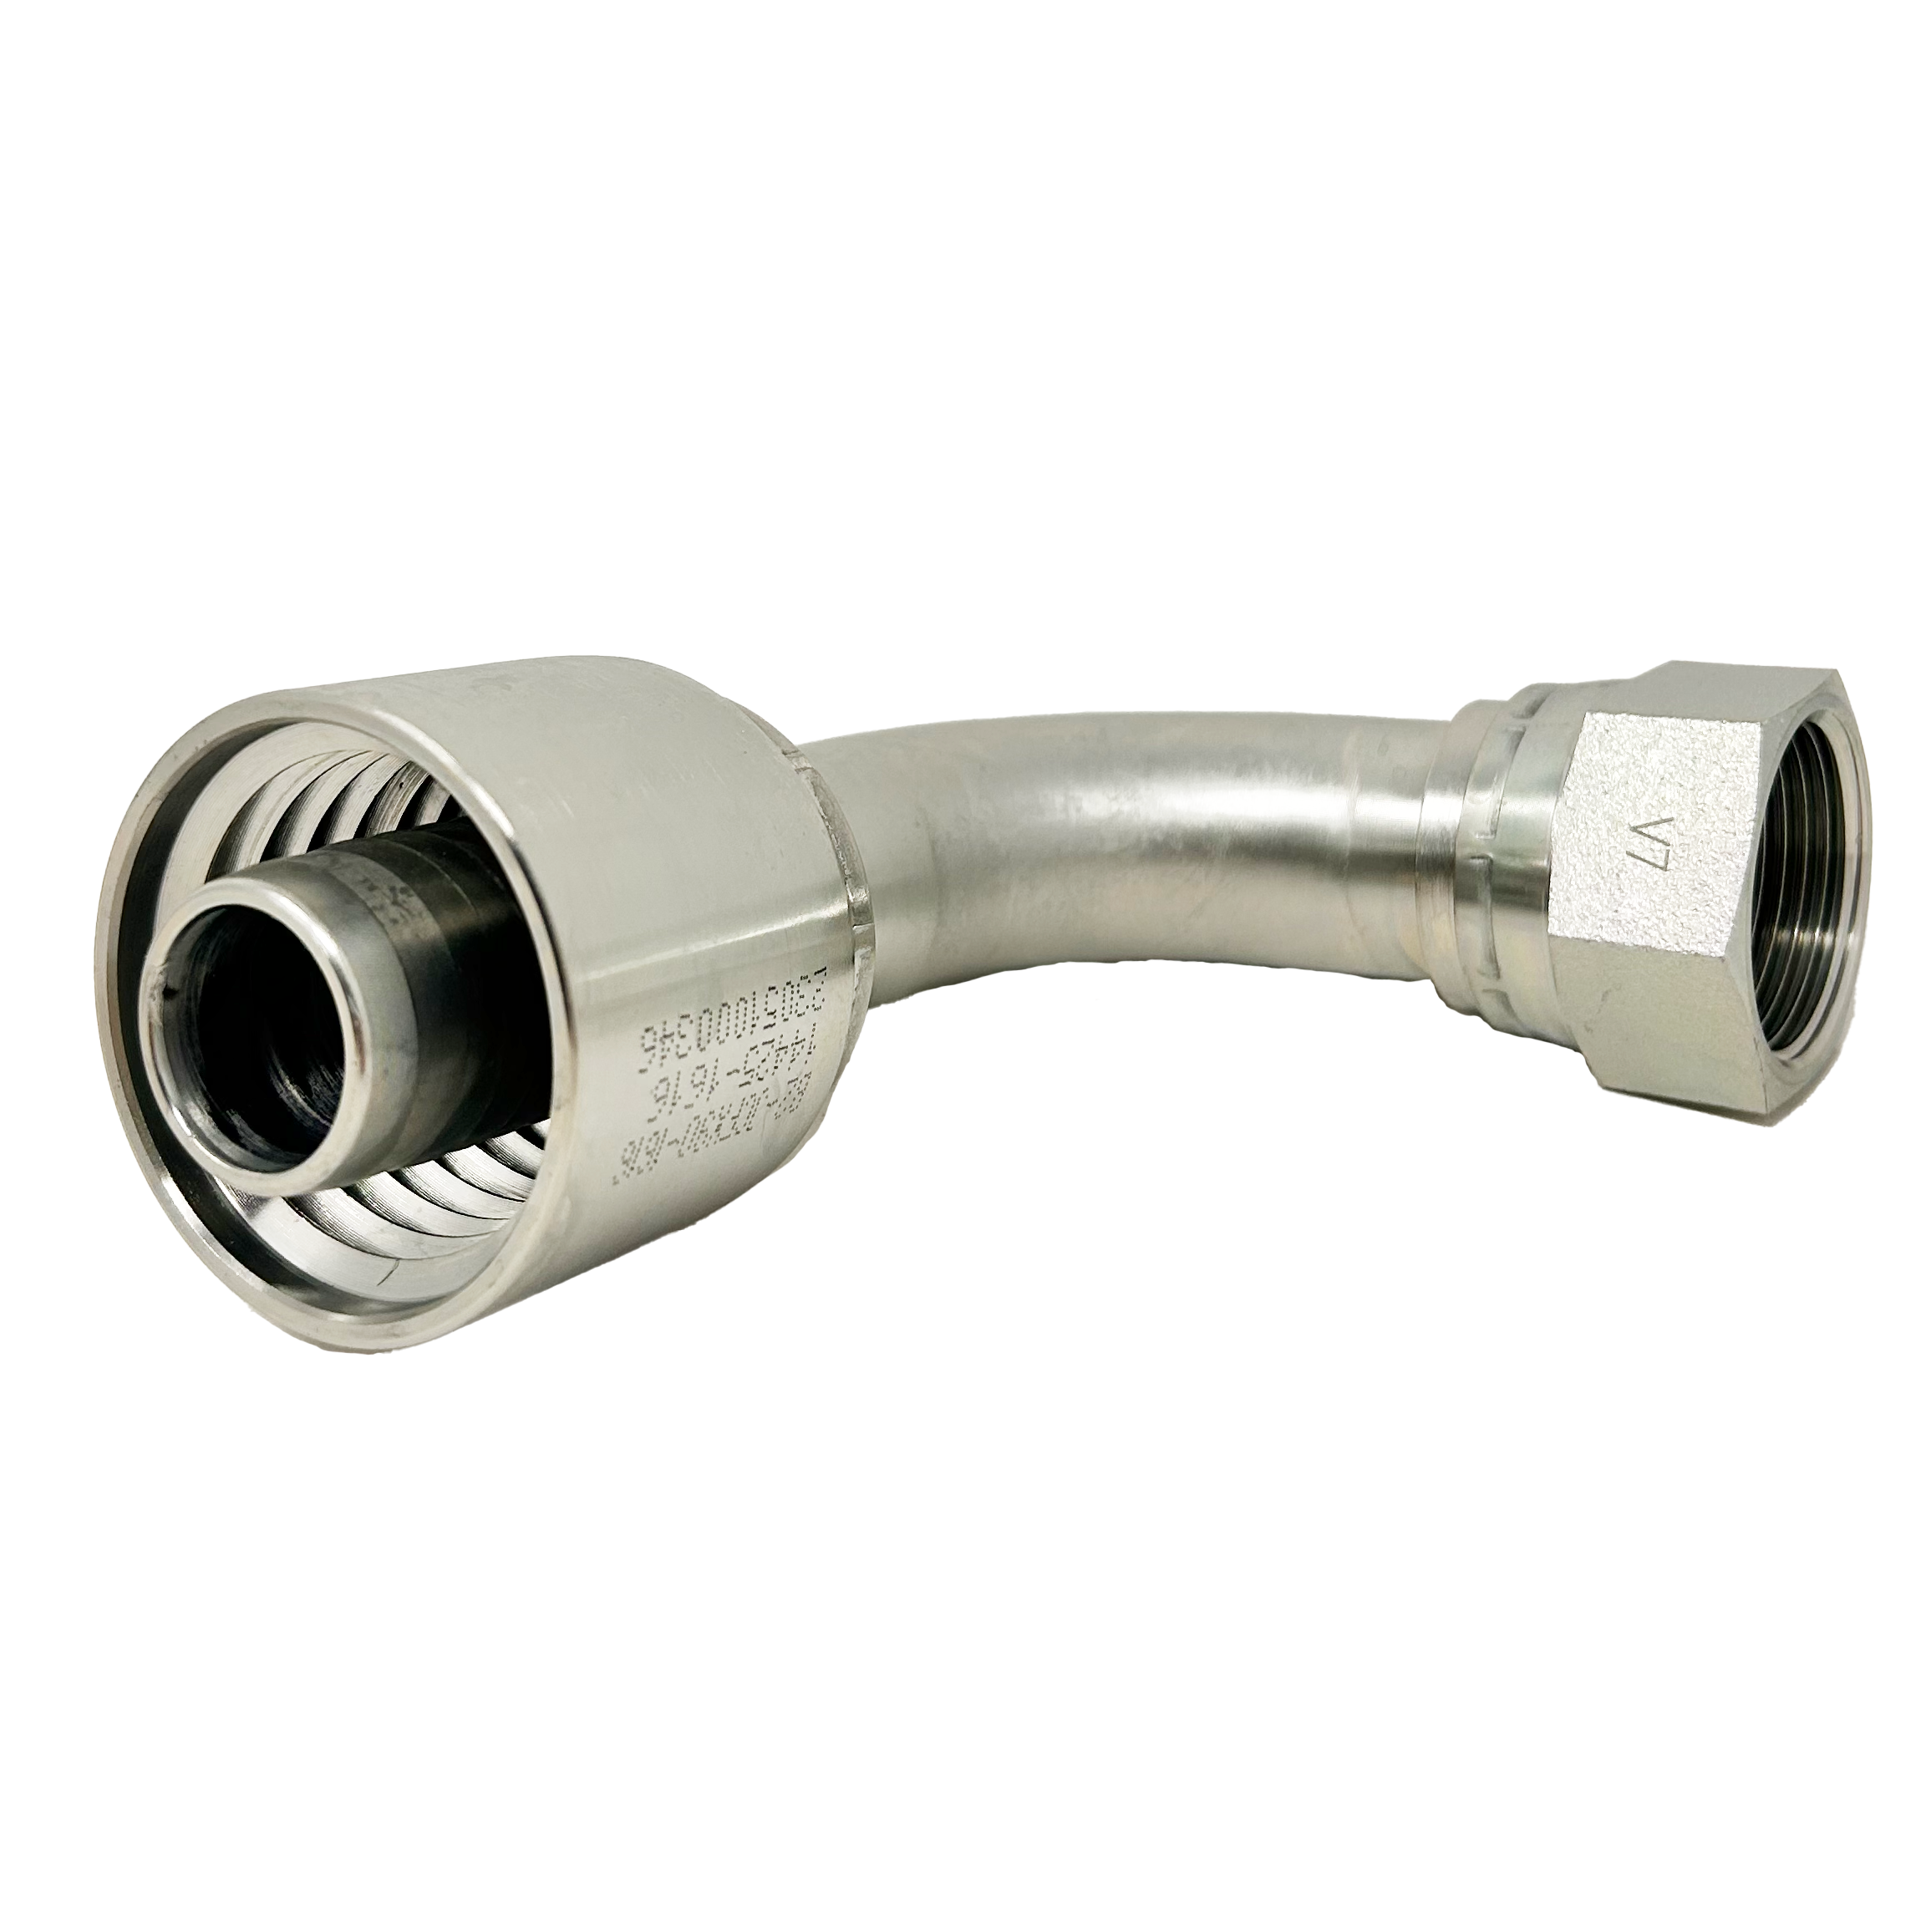 B2-JCFX90-0608: Continental Hose Fitting, 0.375 (3/8") Hose ID x 3/4-16 Female JIC, 90-Degree Swivel Connection